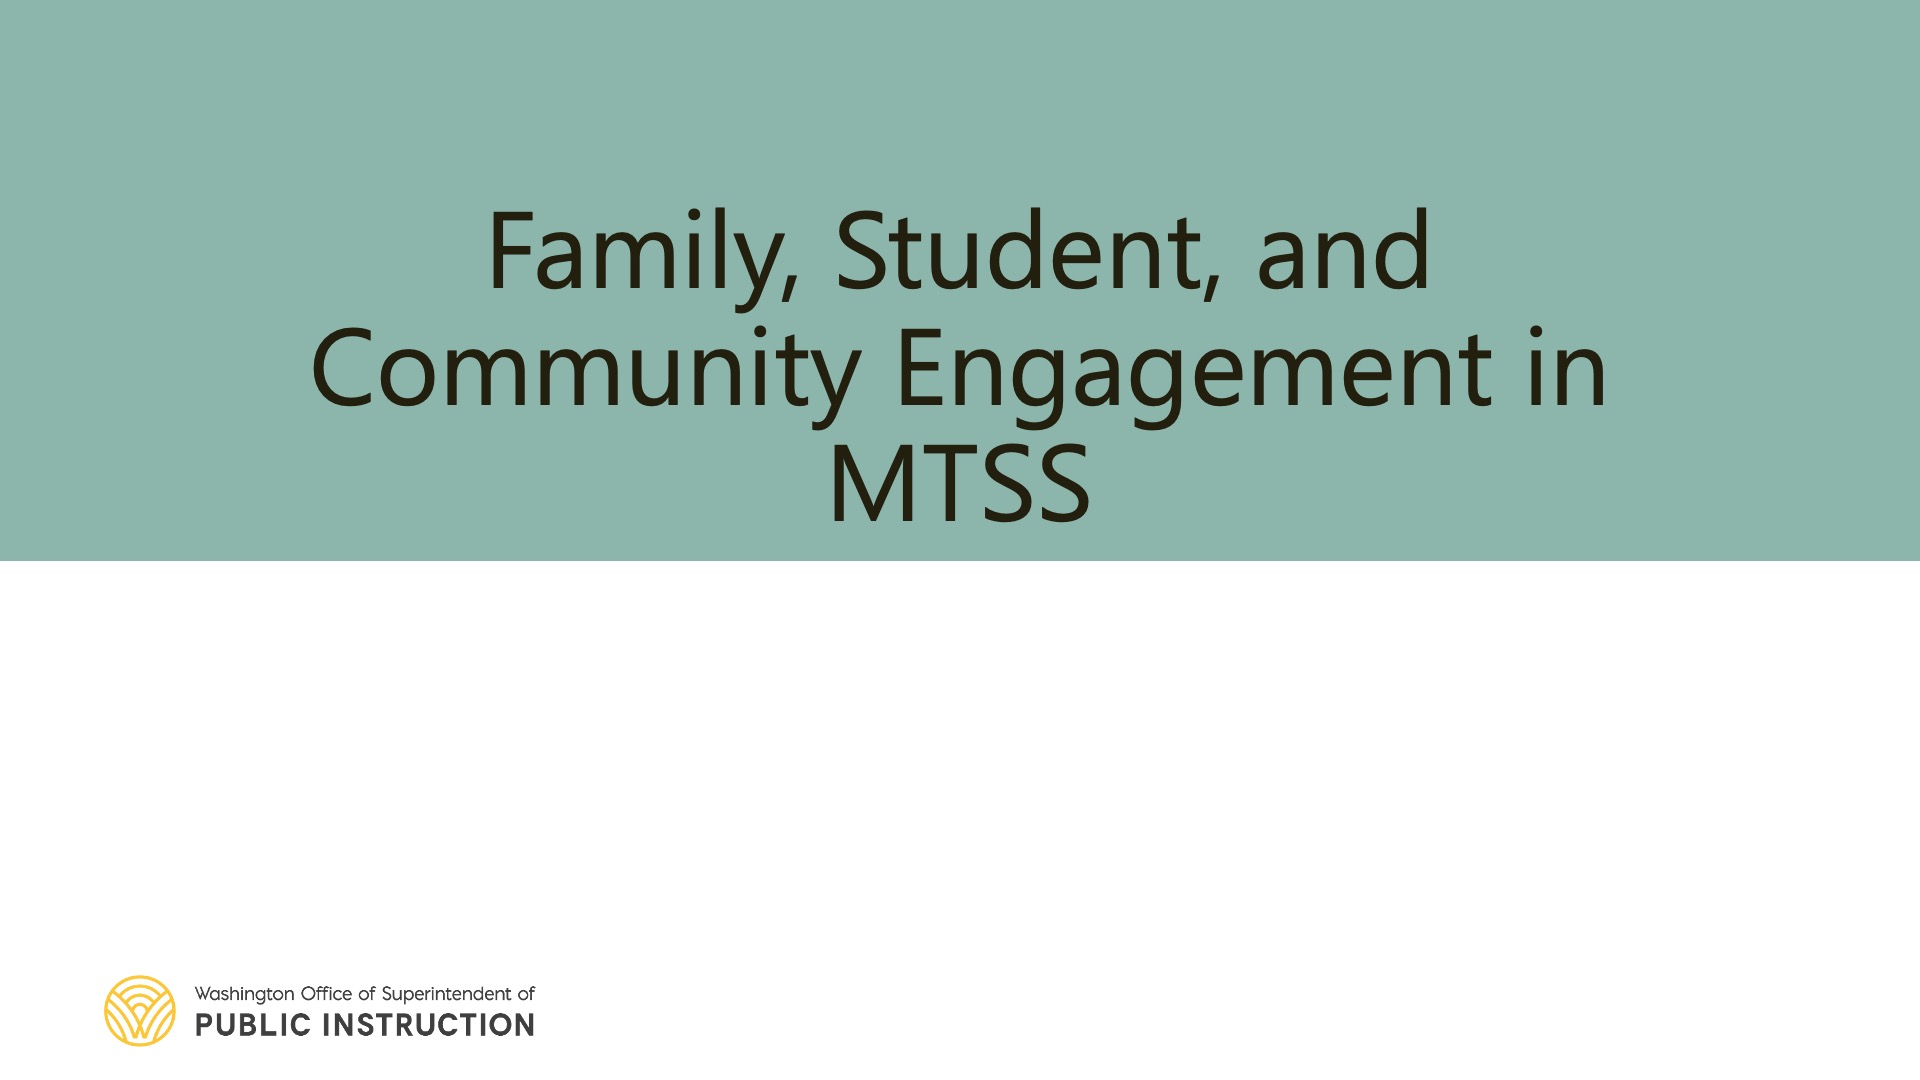 Family, Student, and Community Engagement in MTSS YouTube video thumbnail